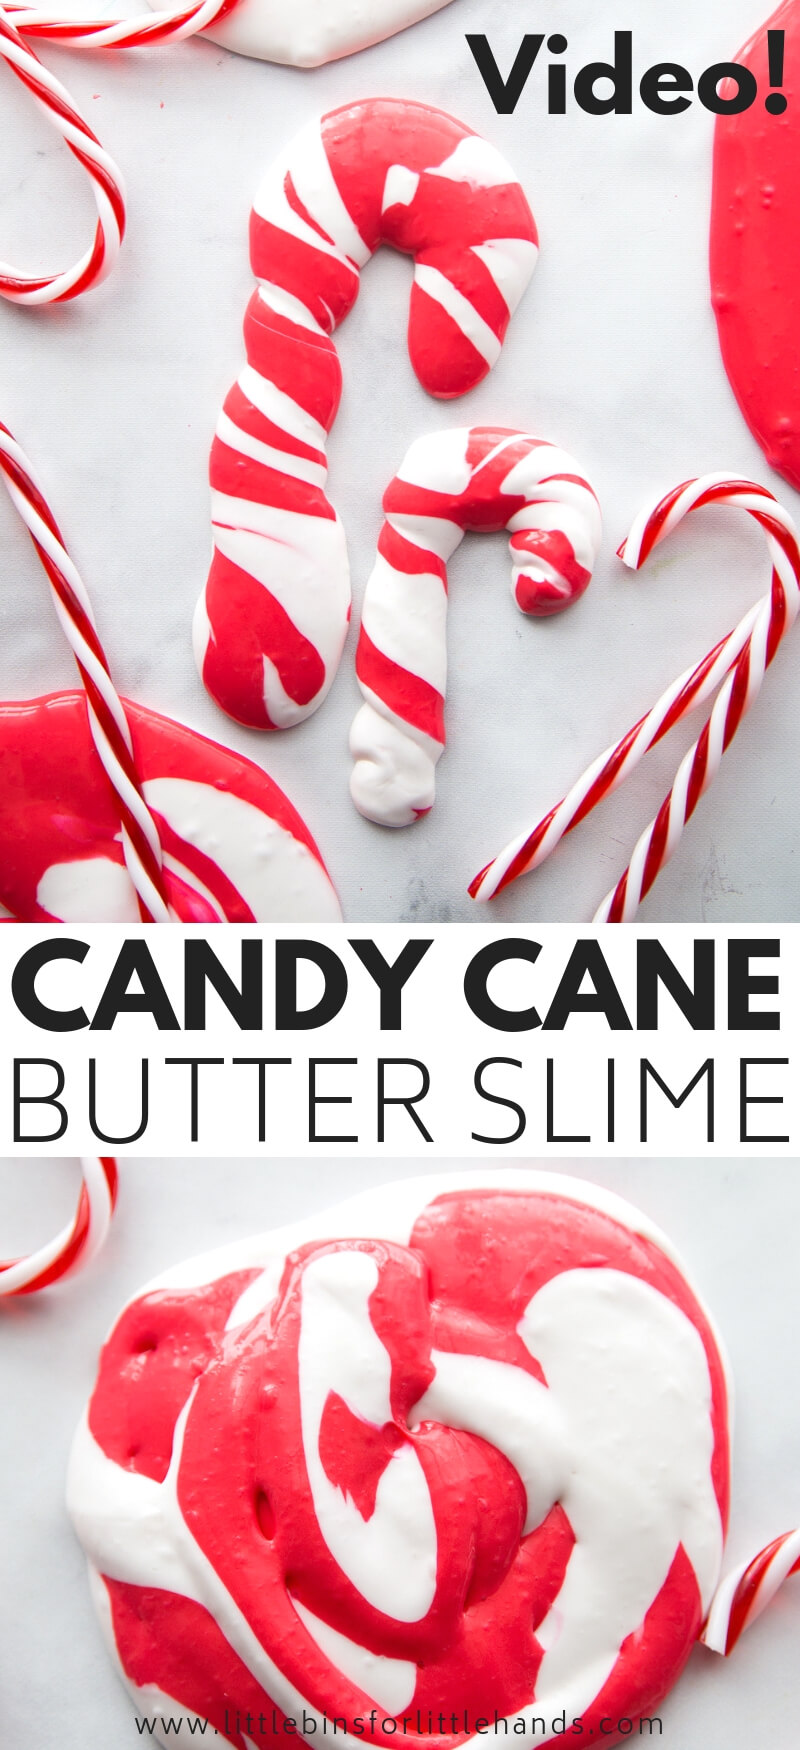 Christmas butter slime recipe with a candy cane theme.